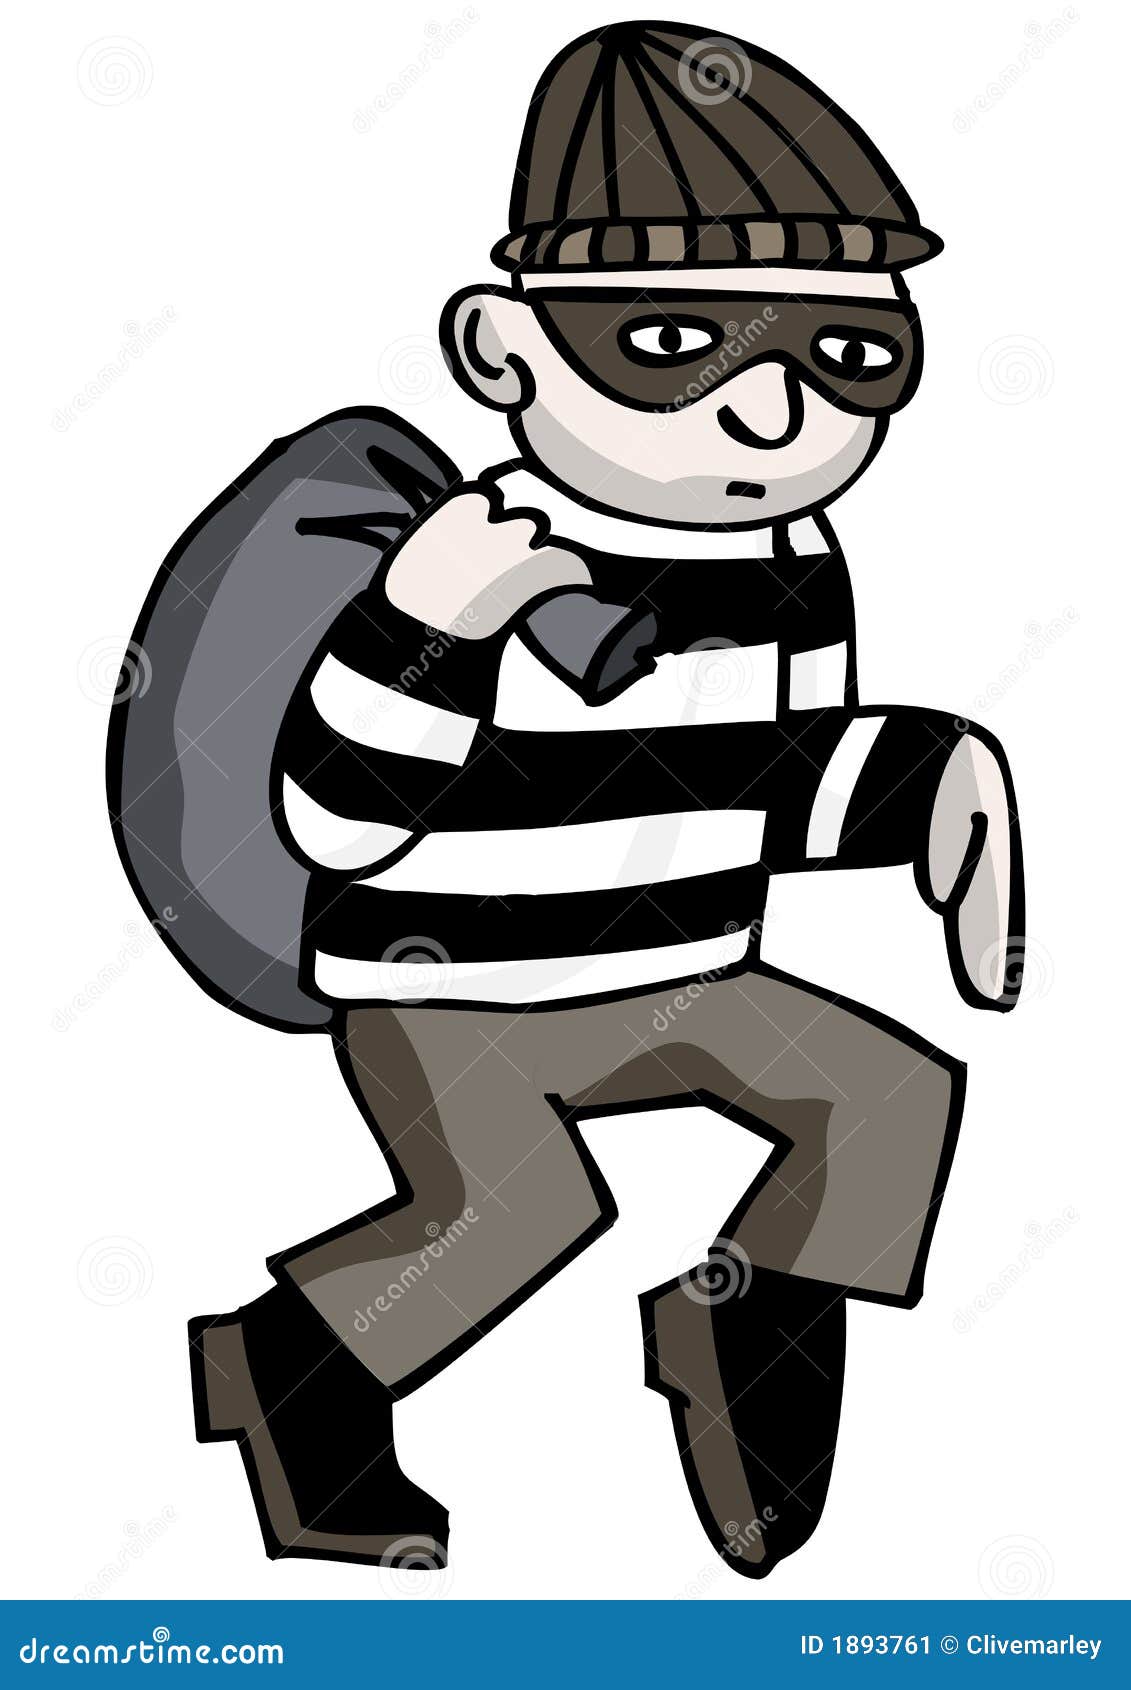 Robber Stock Image - Image: 1893761